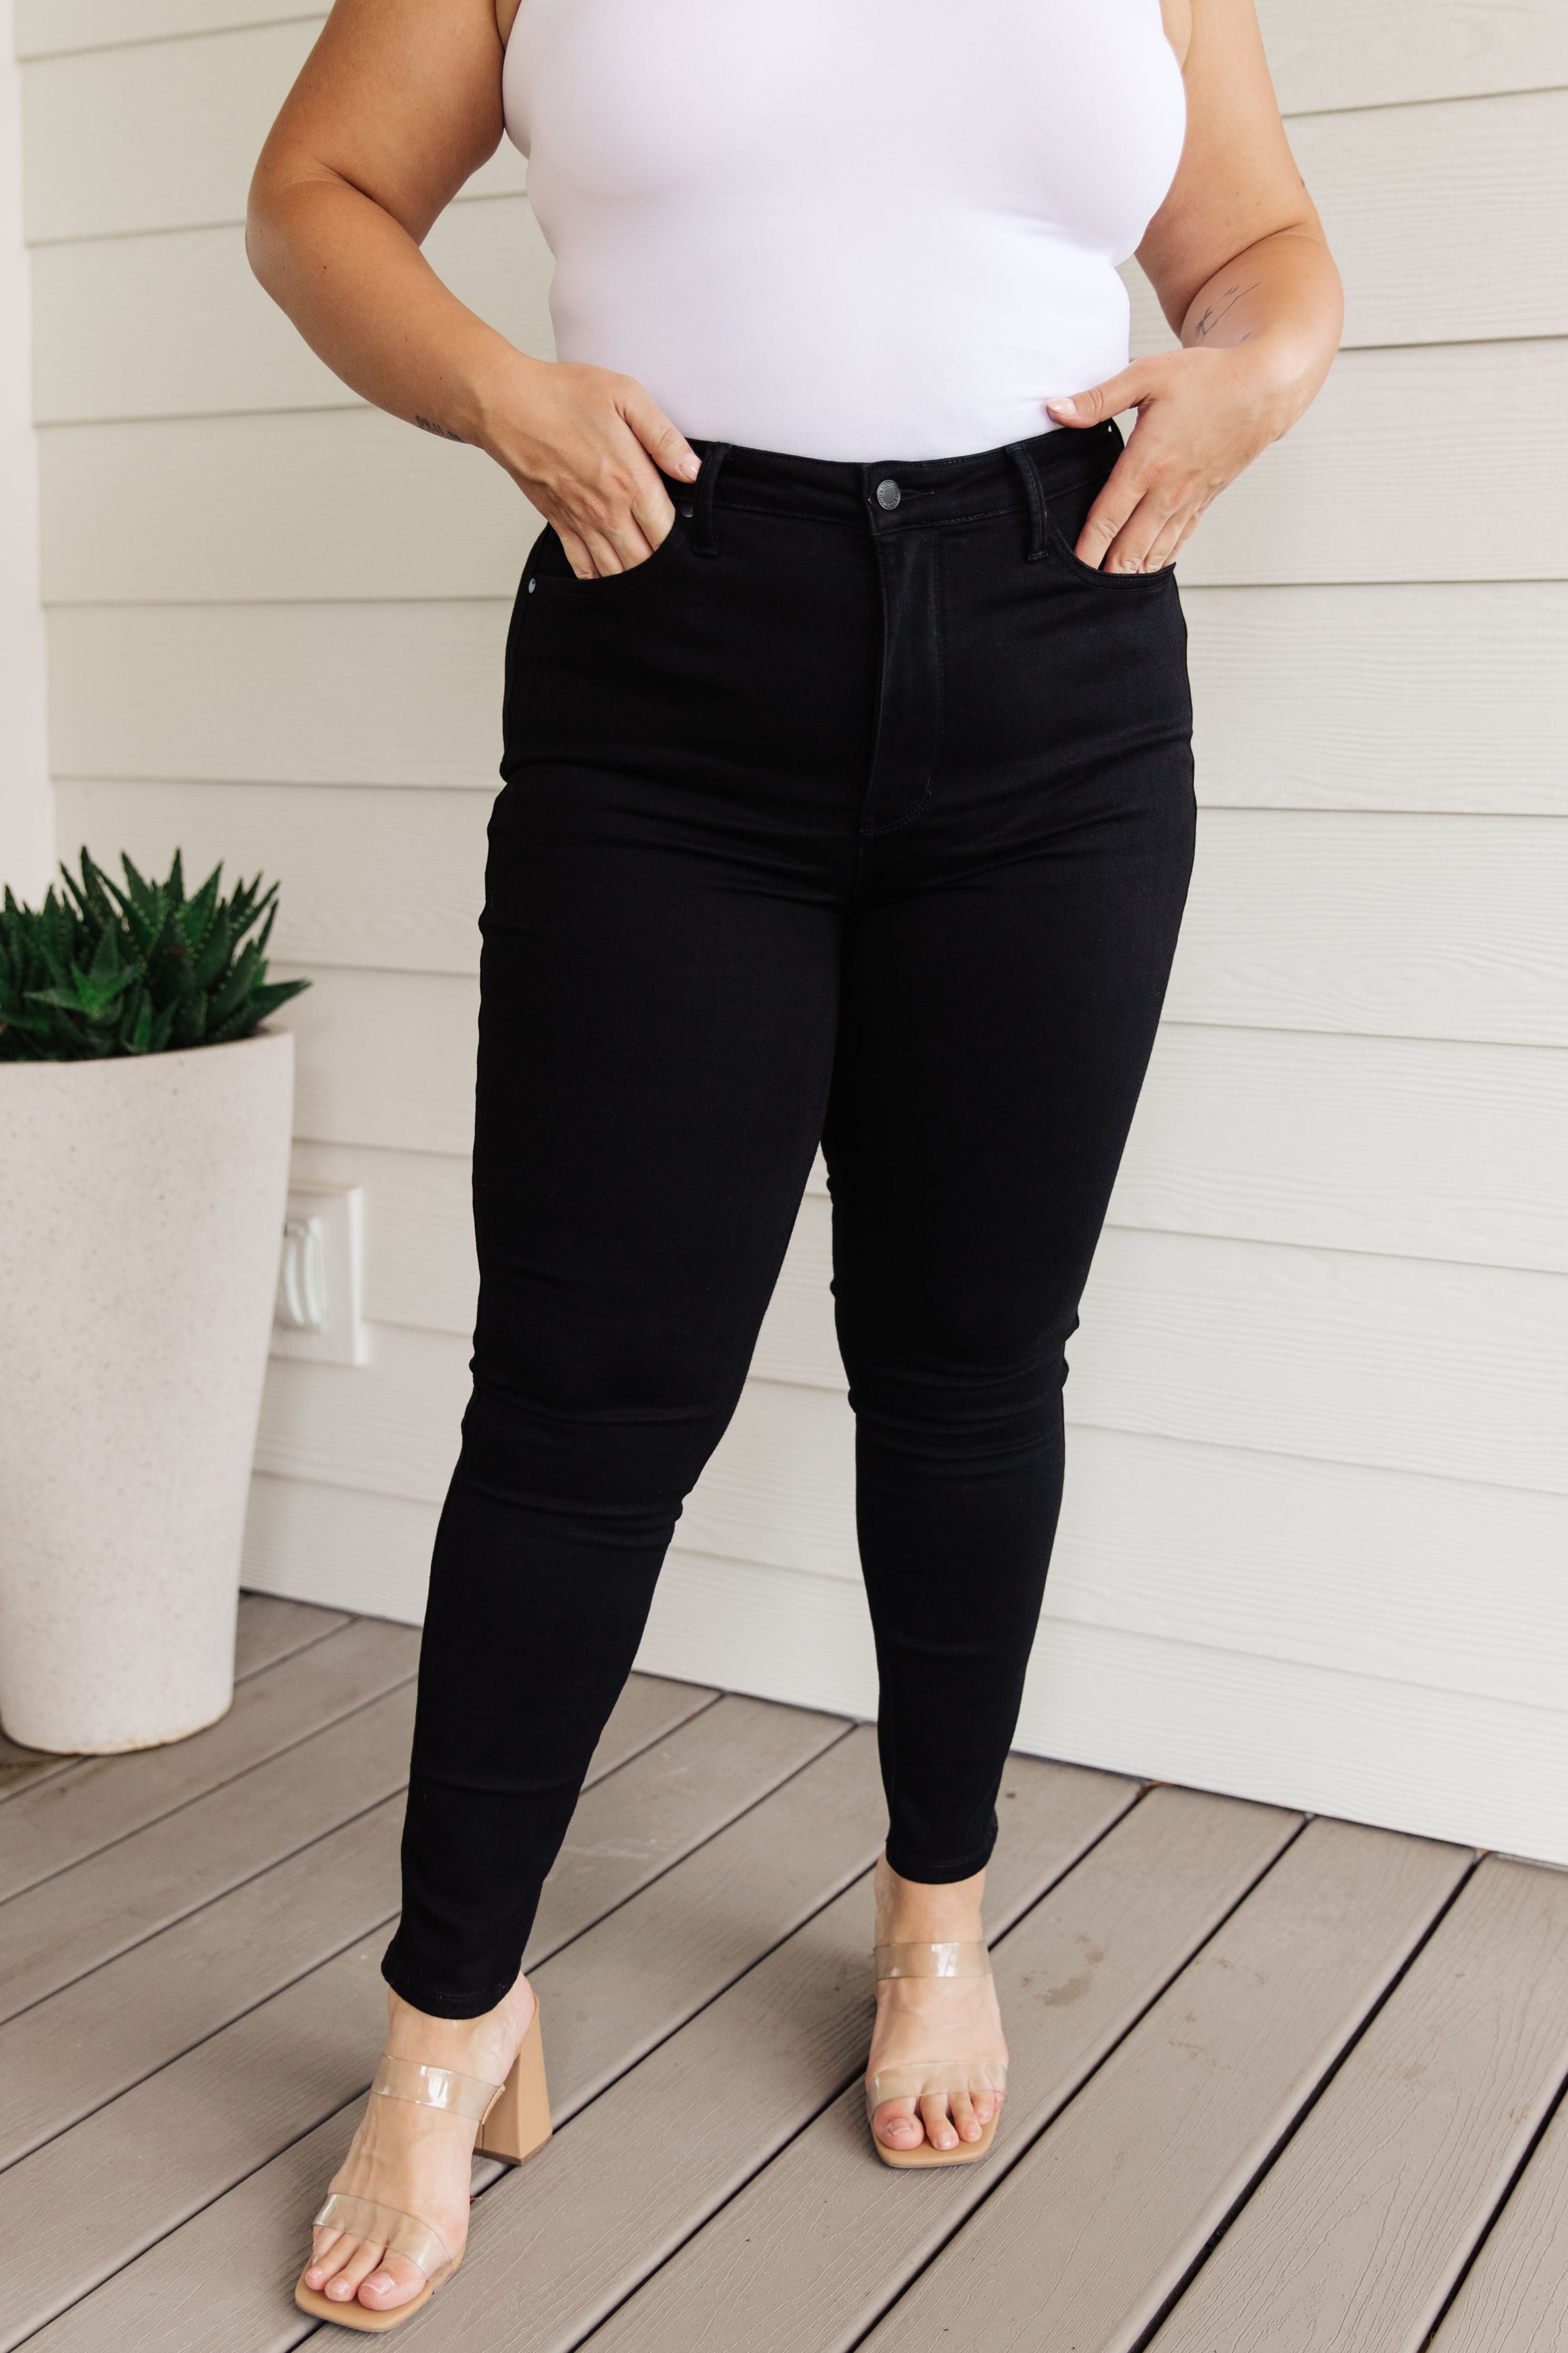 Judy Blue Black Audrey High Rise Tummy Control Top Classic Skinny Jeans Ave Shops